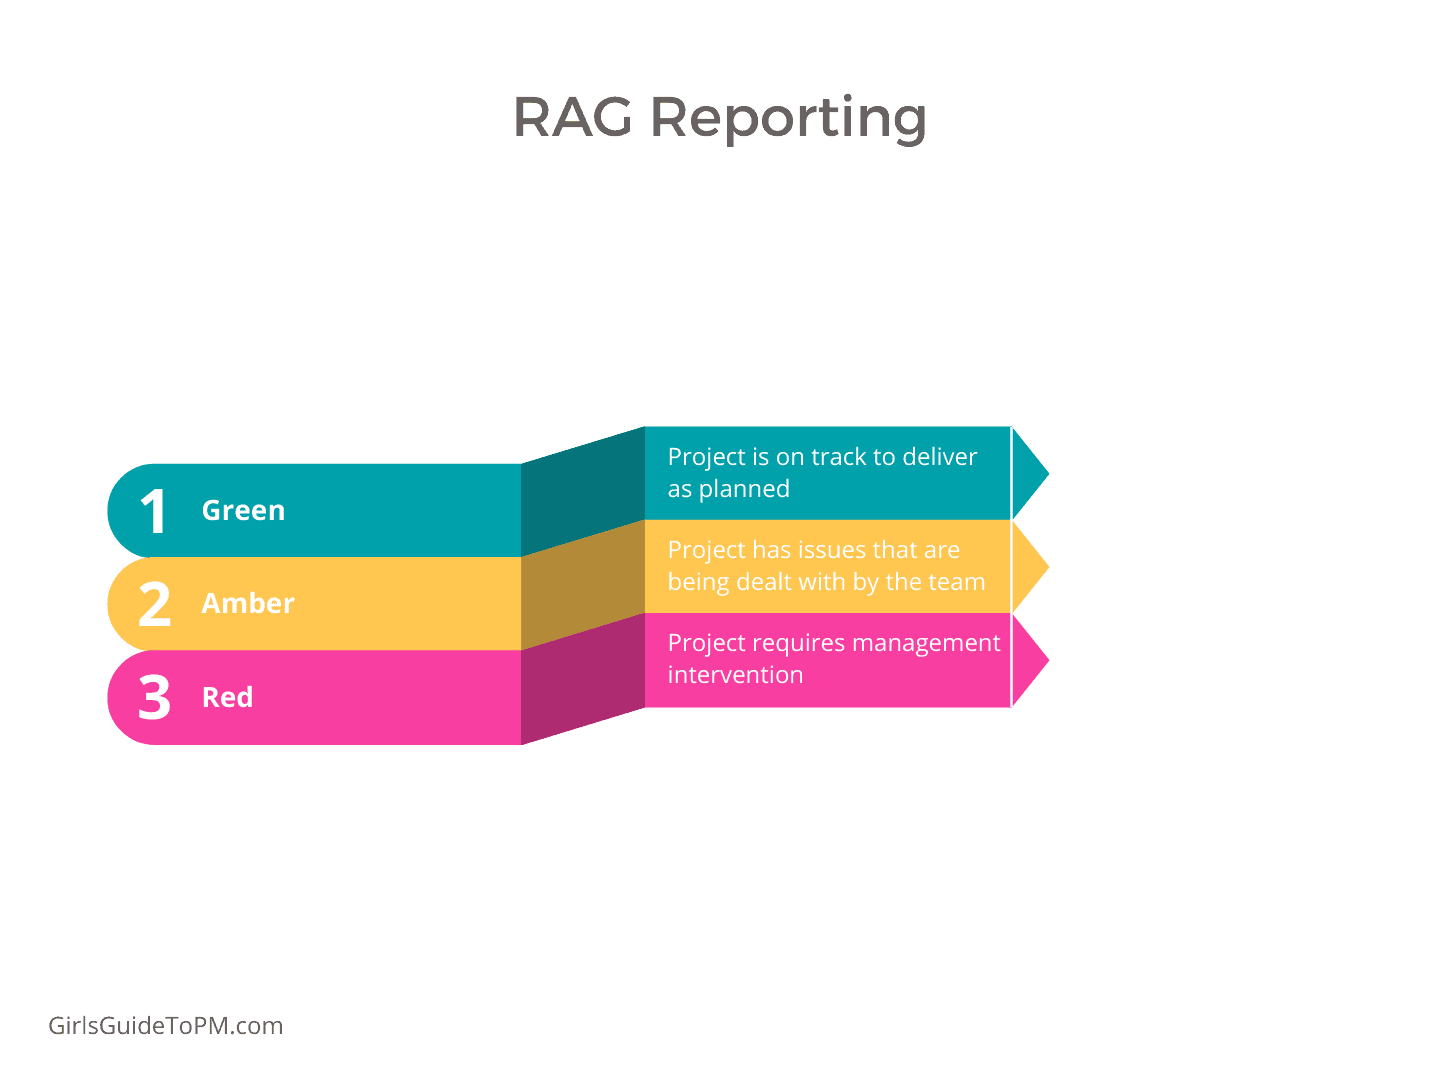 RAG Reporting: Green, Amber, Red